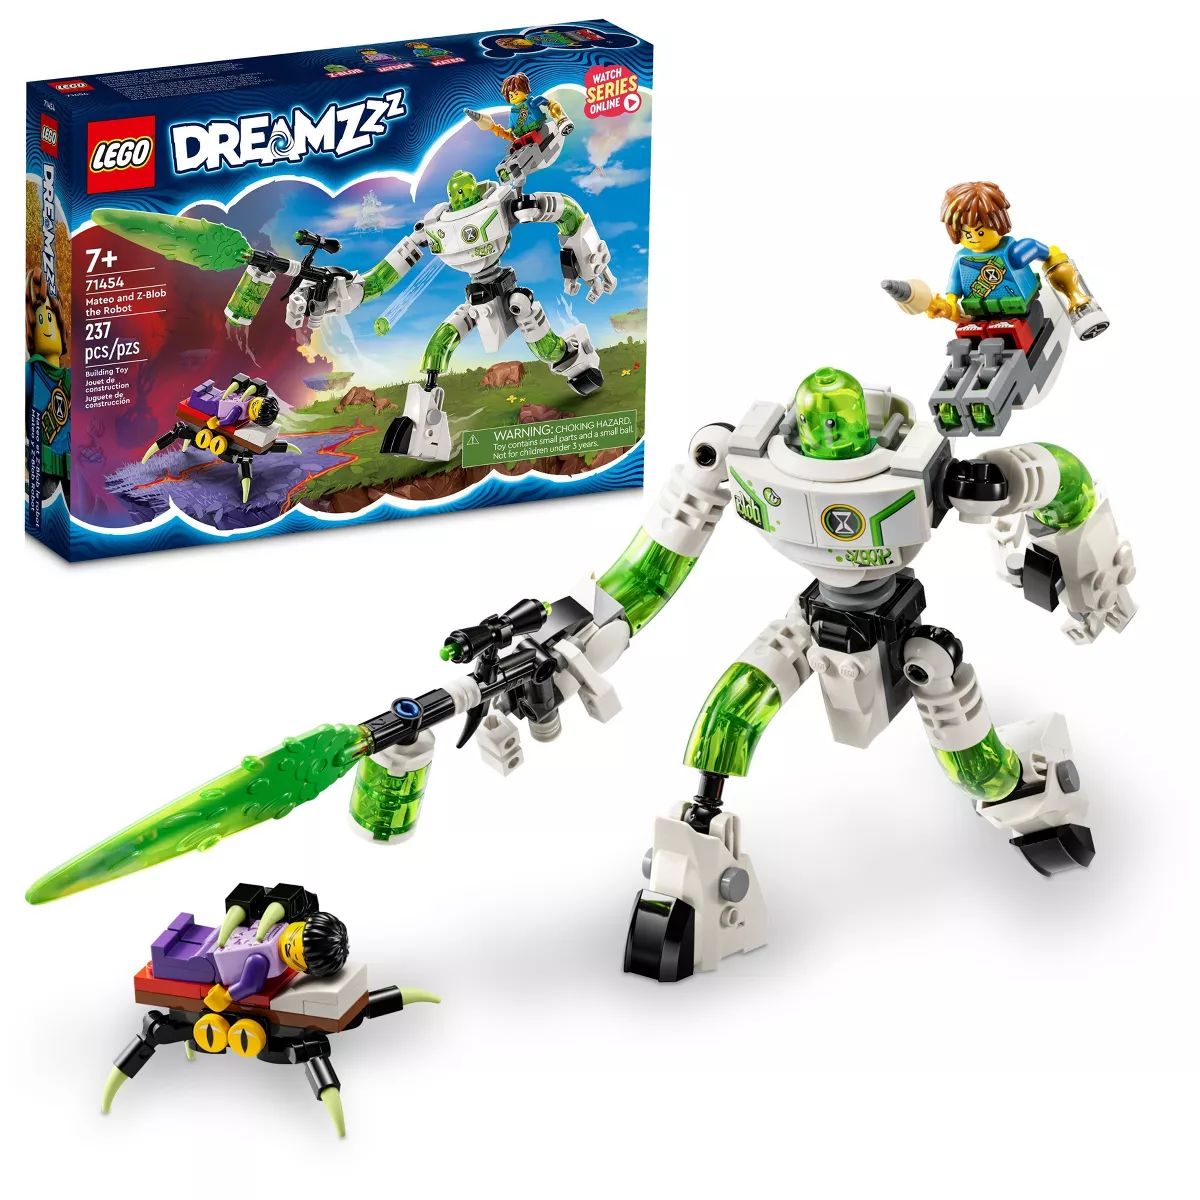 LEGO DREAMZzz Mateo and Z-Blob the Robot from New TV Show Building Toy 71454 | Target